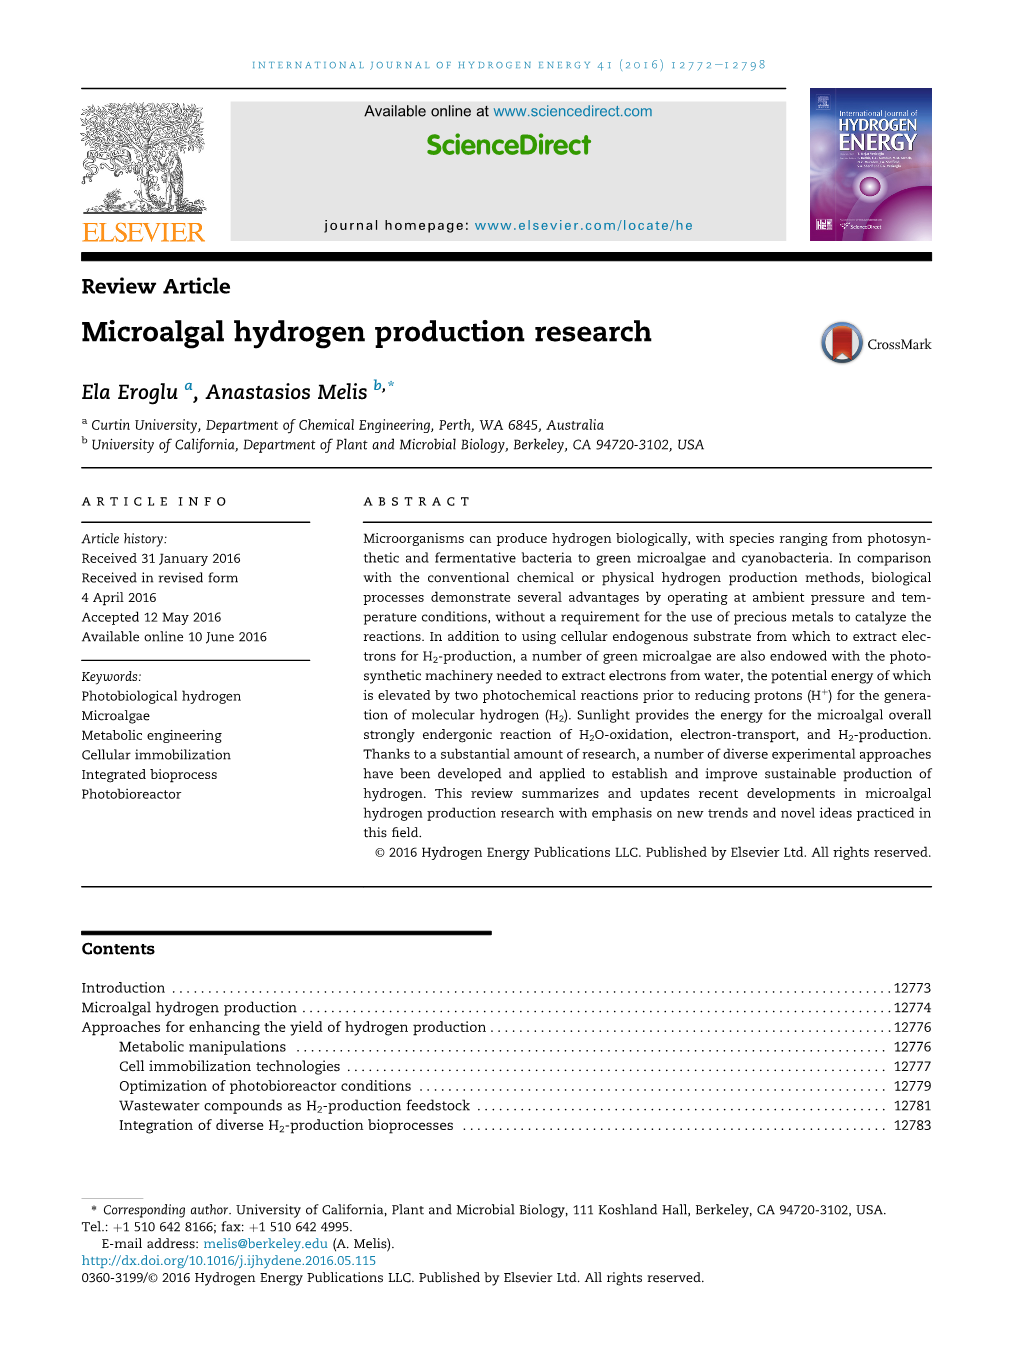 Microalgal Hydrogen Production Research